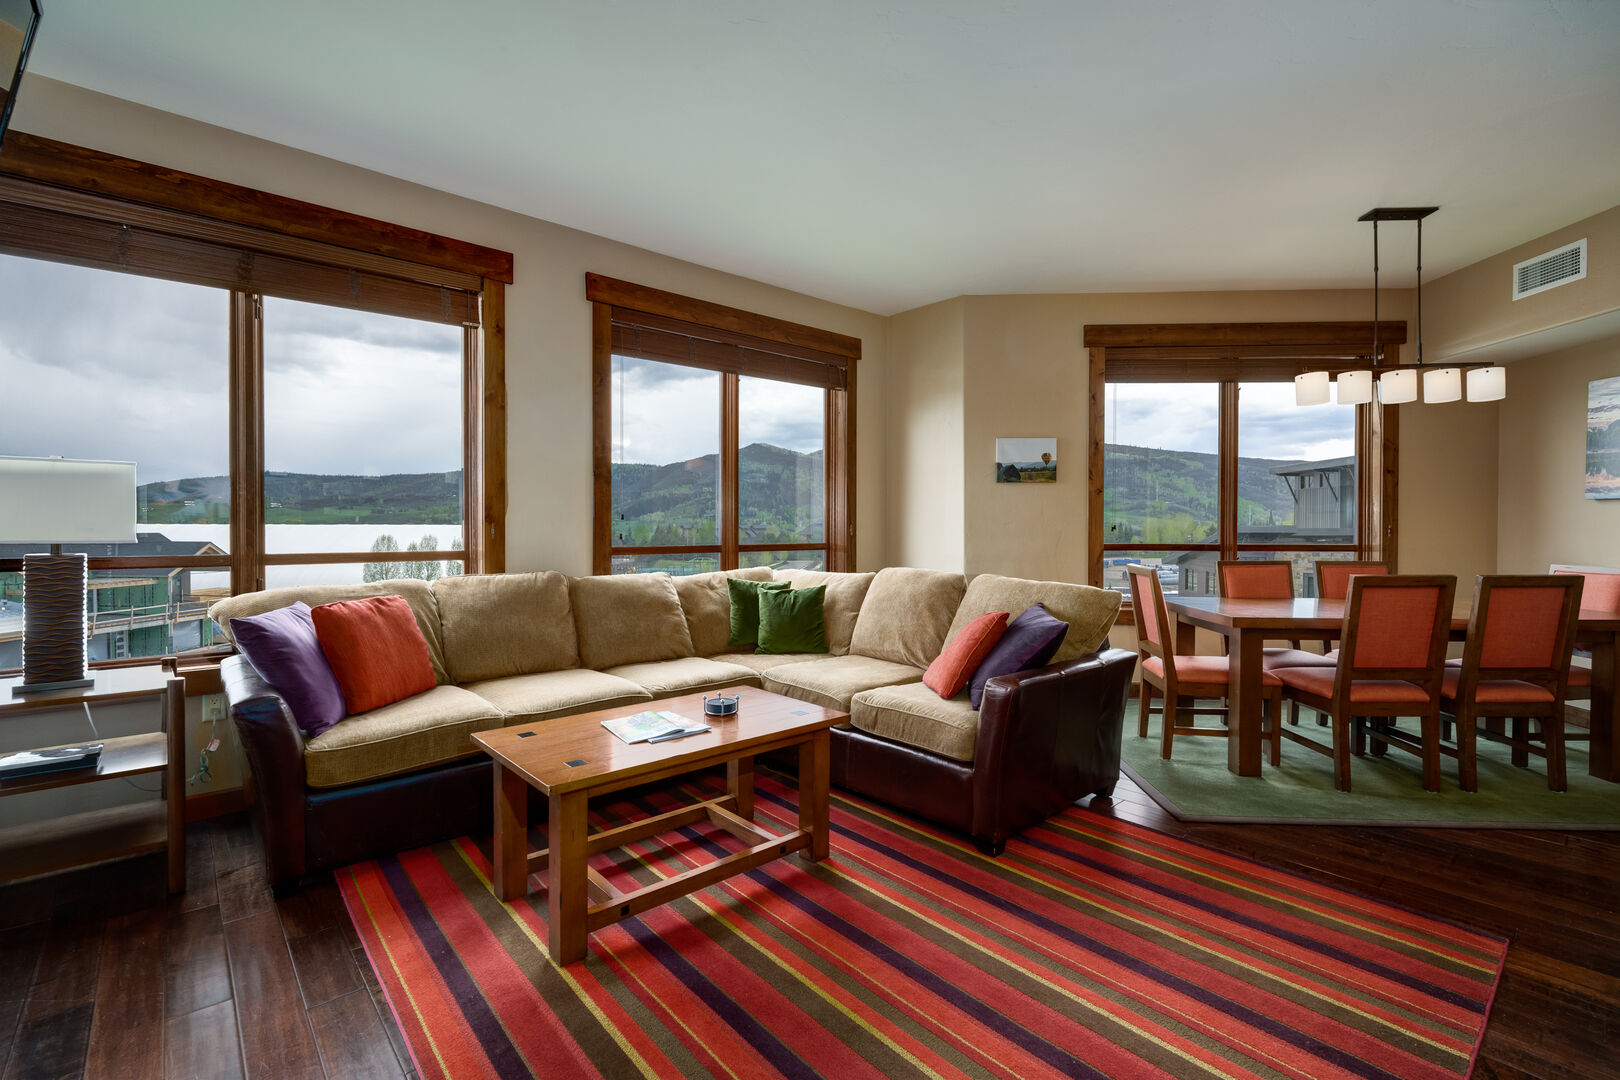 Enjoy mountain views from the main living area